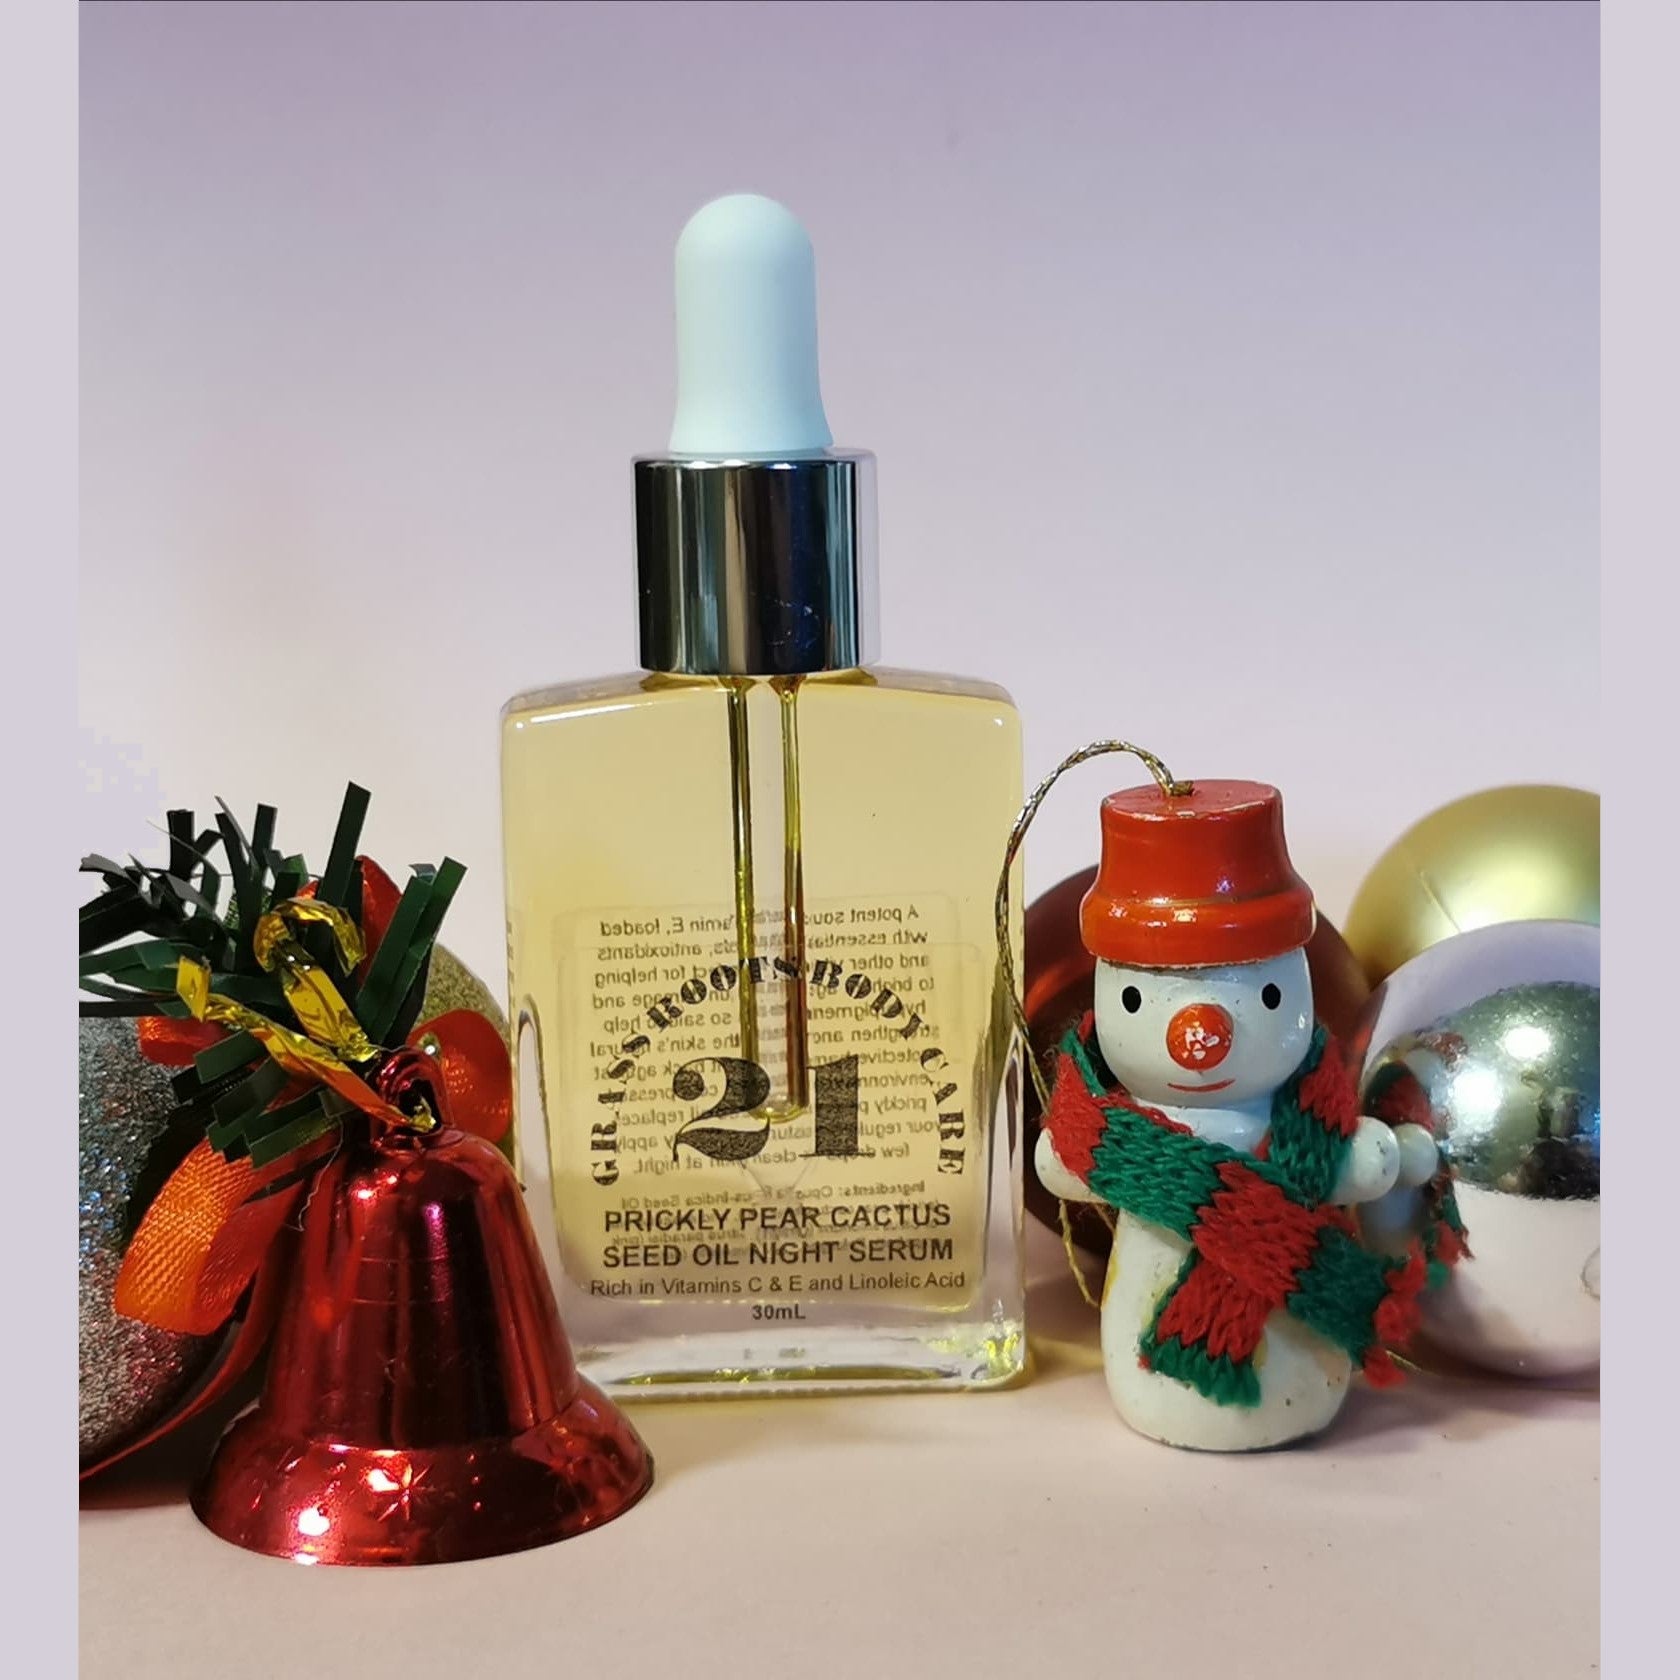 "21" Prickly Pear Cactus Seed Oil Night Serum - CHRISTMAS SPECIAL - SAVE 20%!